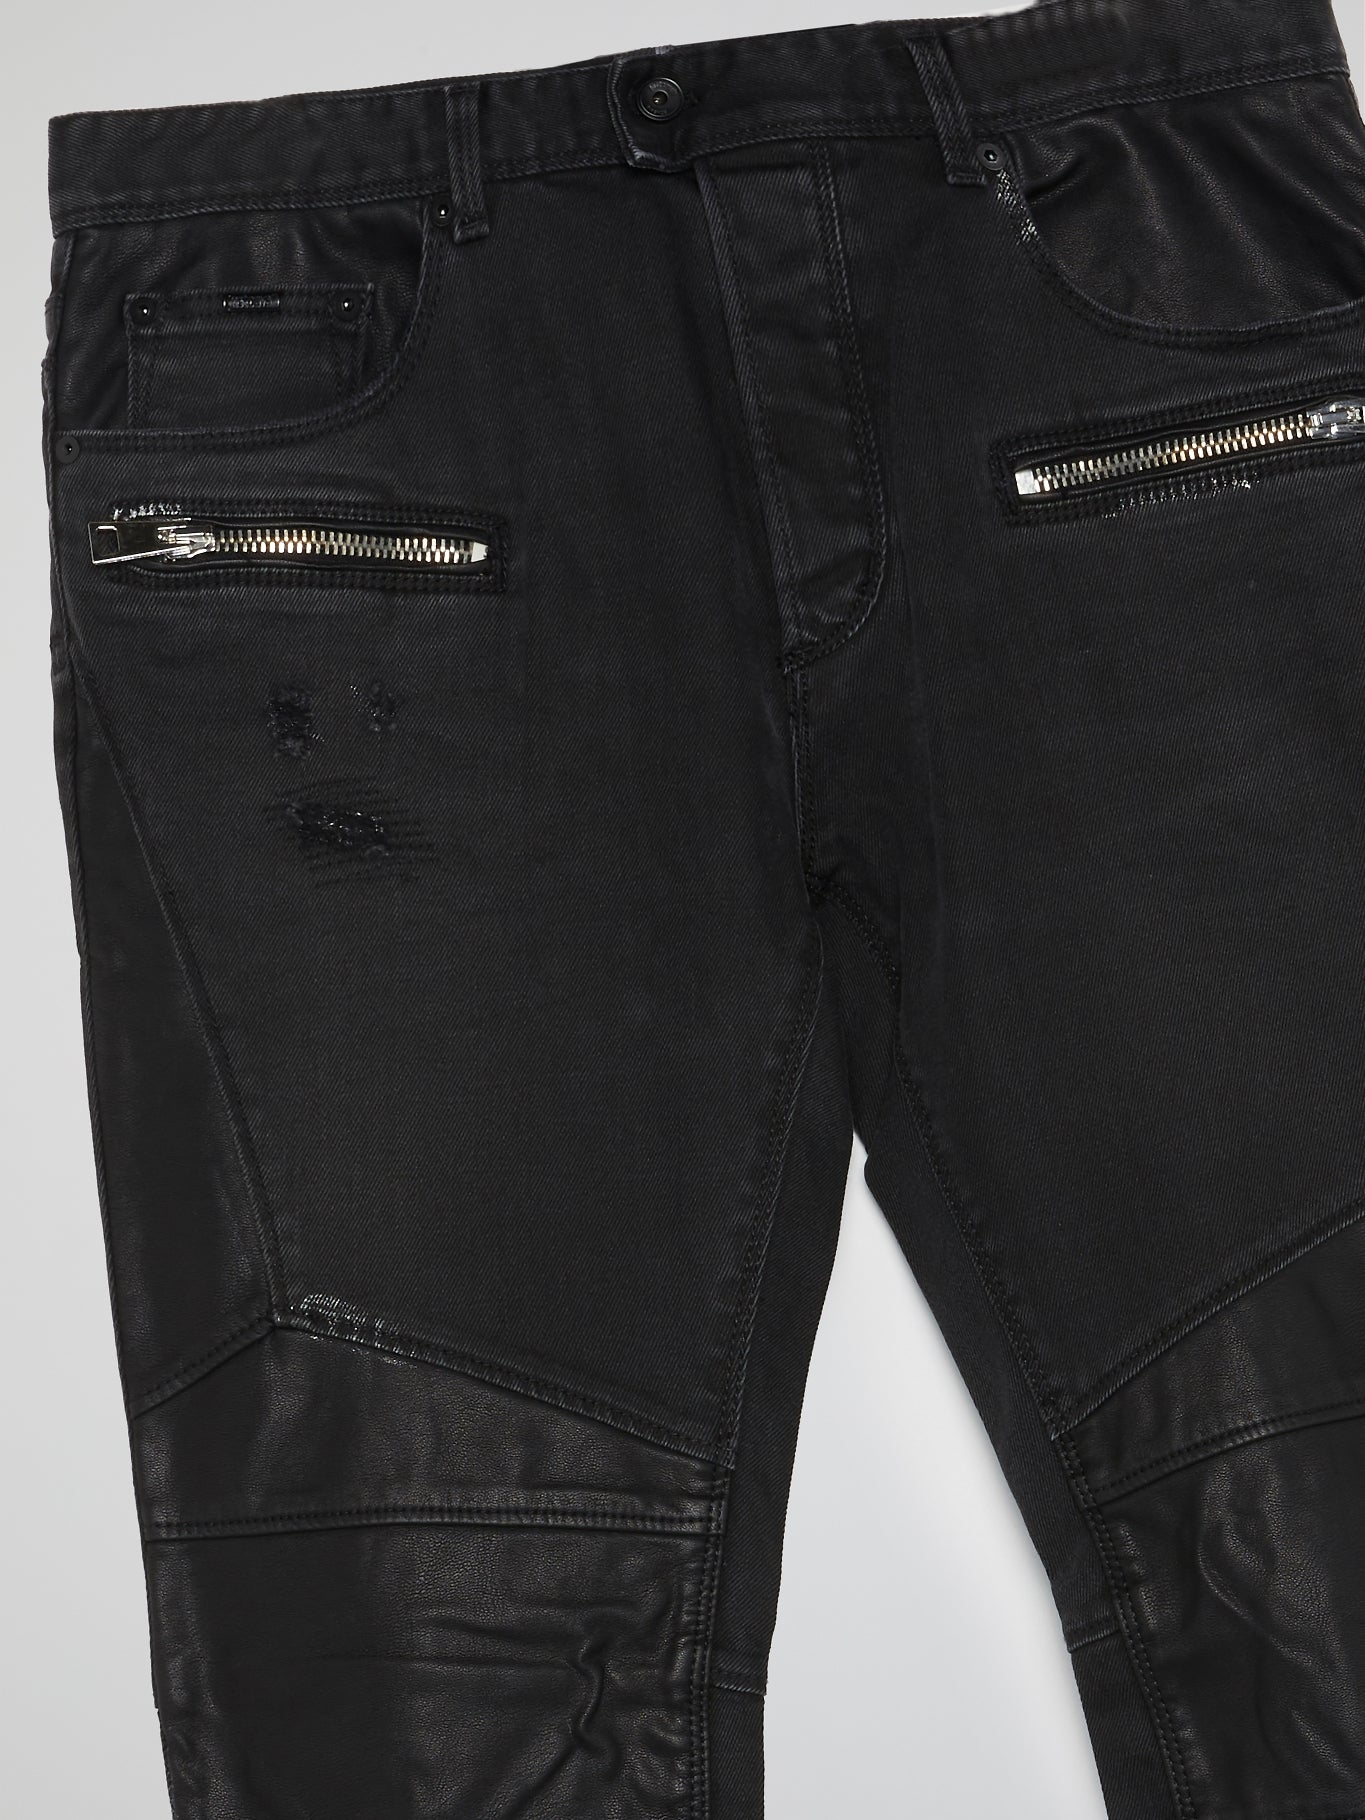 Black Leather Patch Trousers